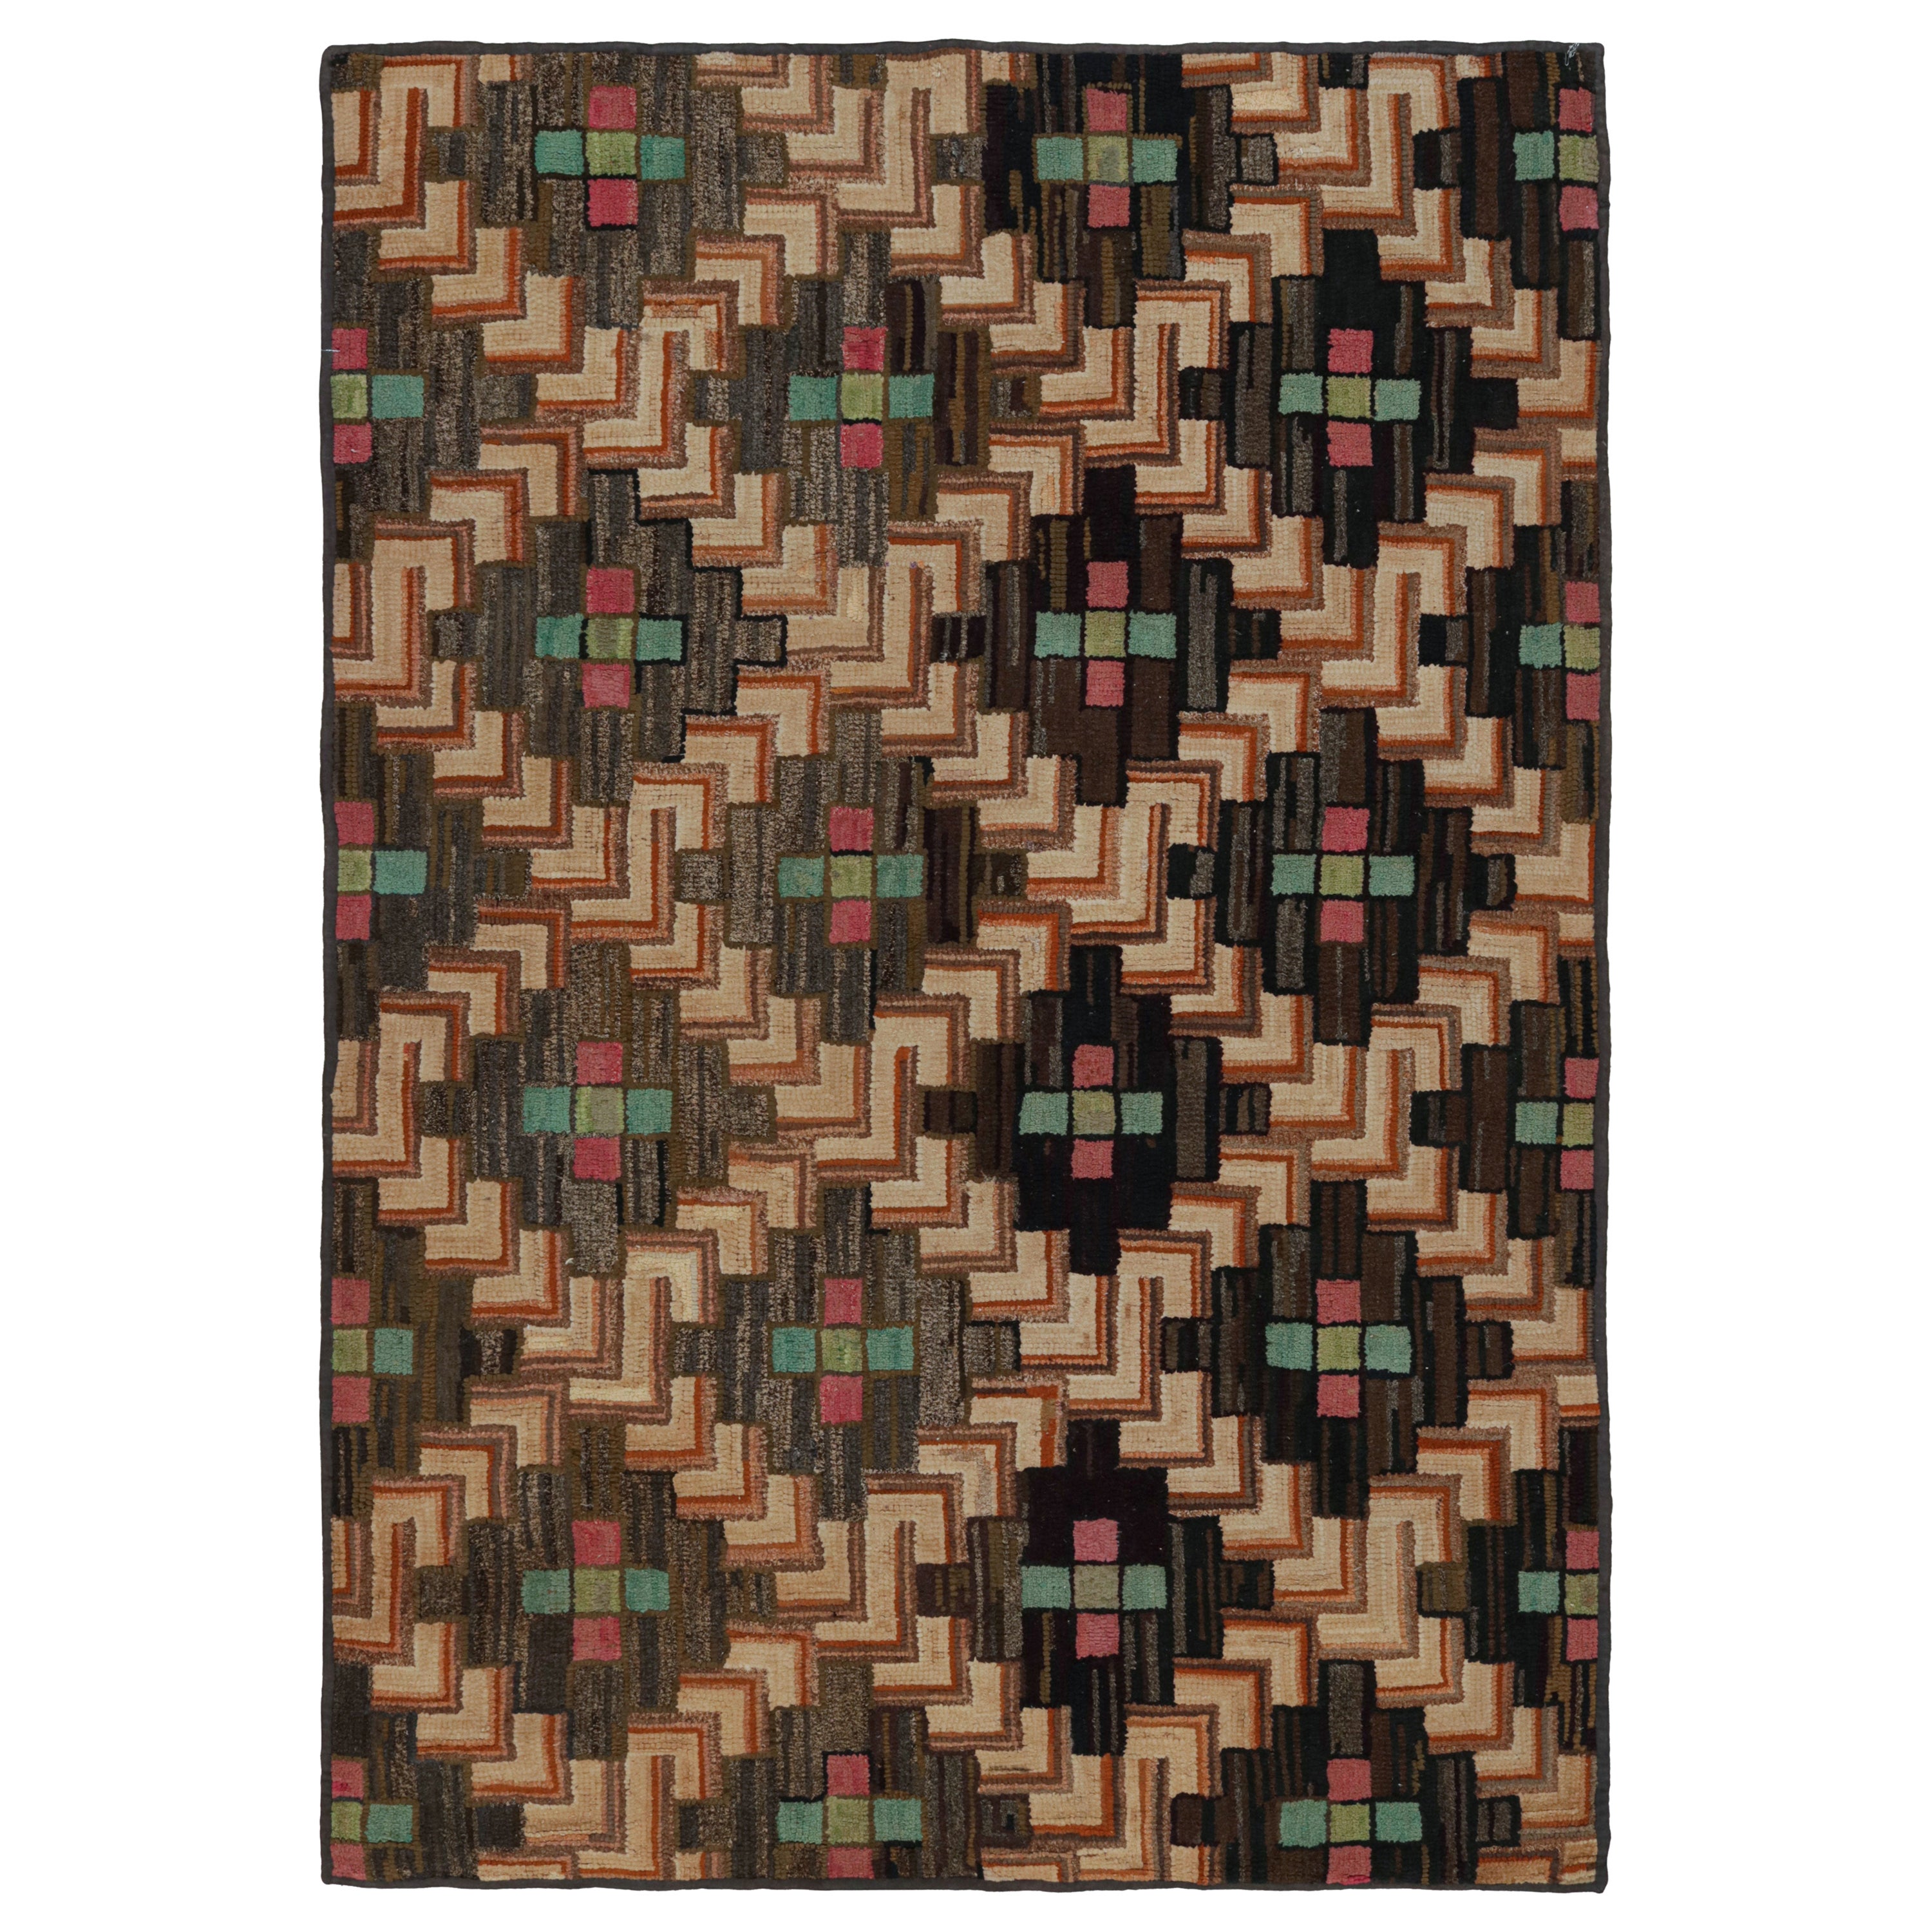 Antique Hooked Rug with Polychromatic Geometric Patterns, from Rug & Kilim For Sale